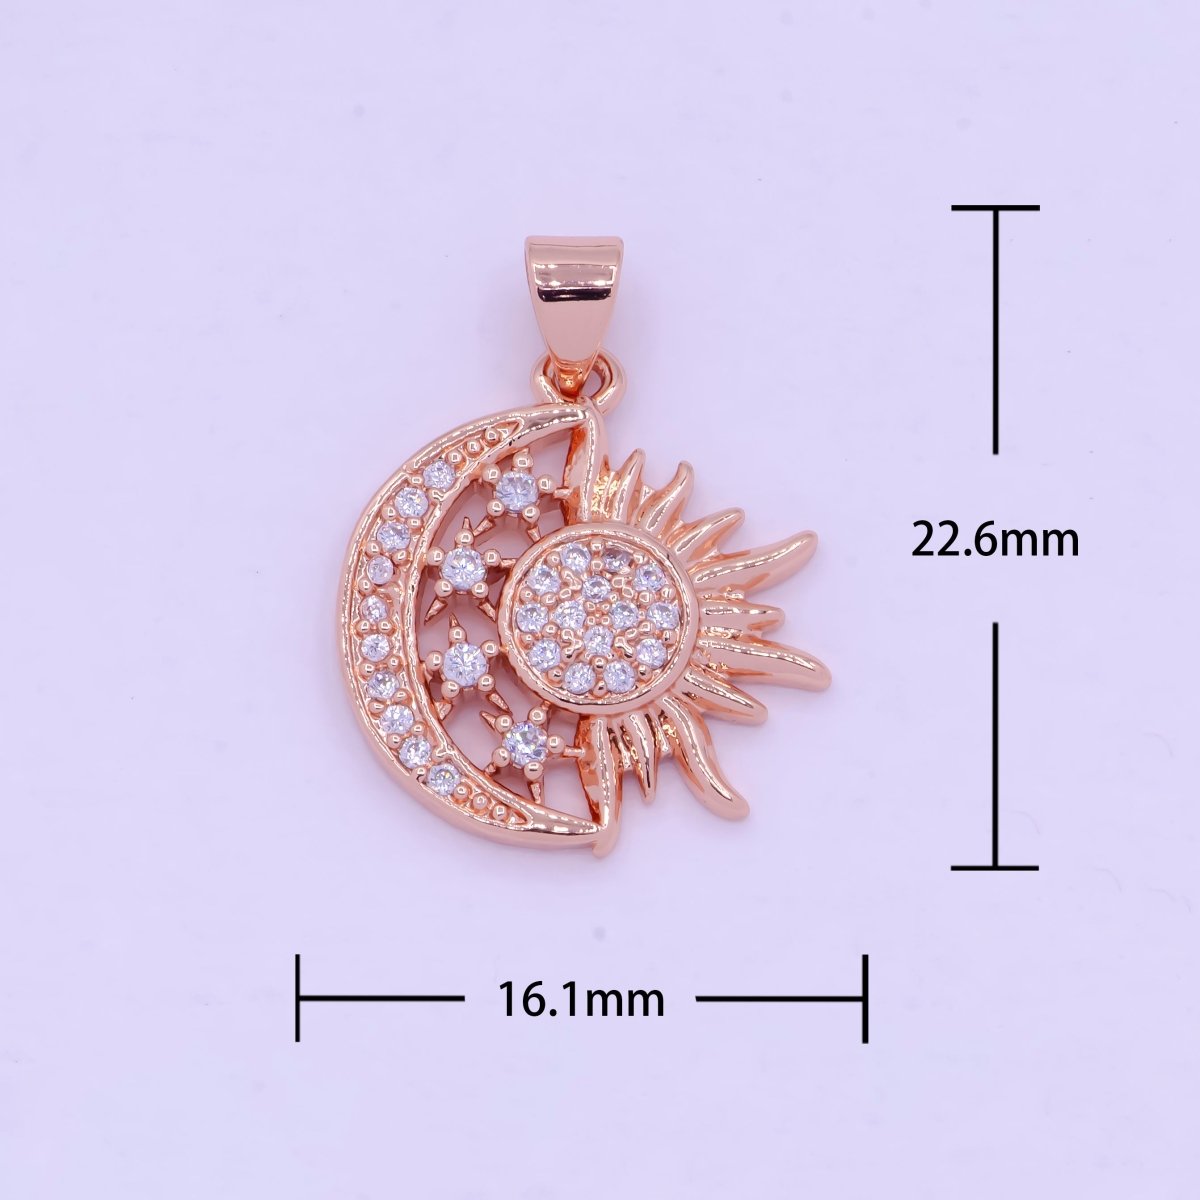 24K Gold Filled Sun and Moon Charm- Micro Pave Celestial Sunshine Charm, Crescent Moon, Sun ray Pendant for Necklace Earring Supply I-912 X-457 X-459 - DLUXCA